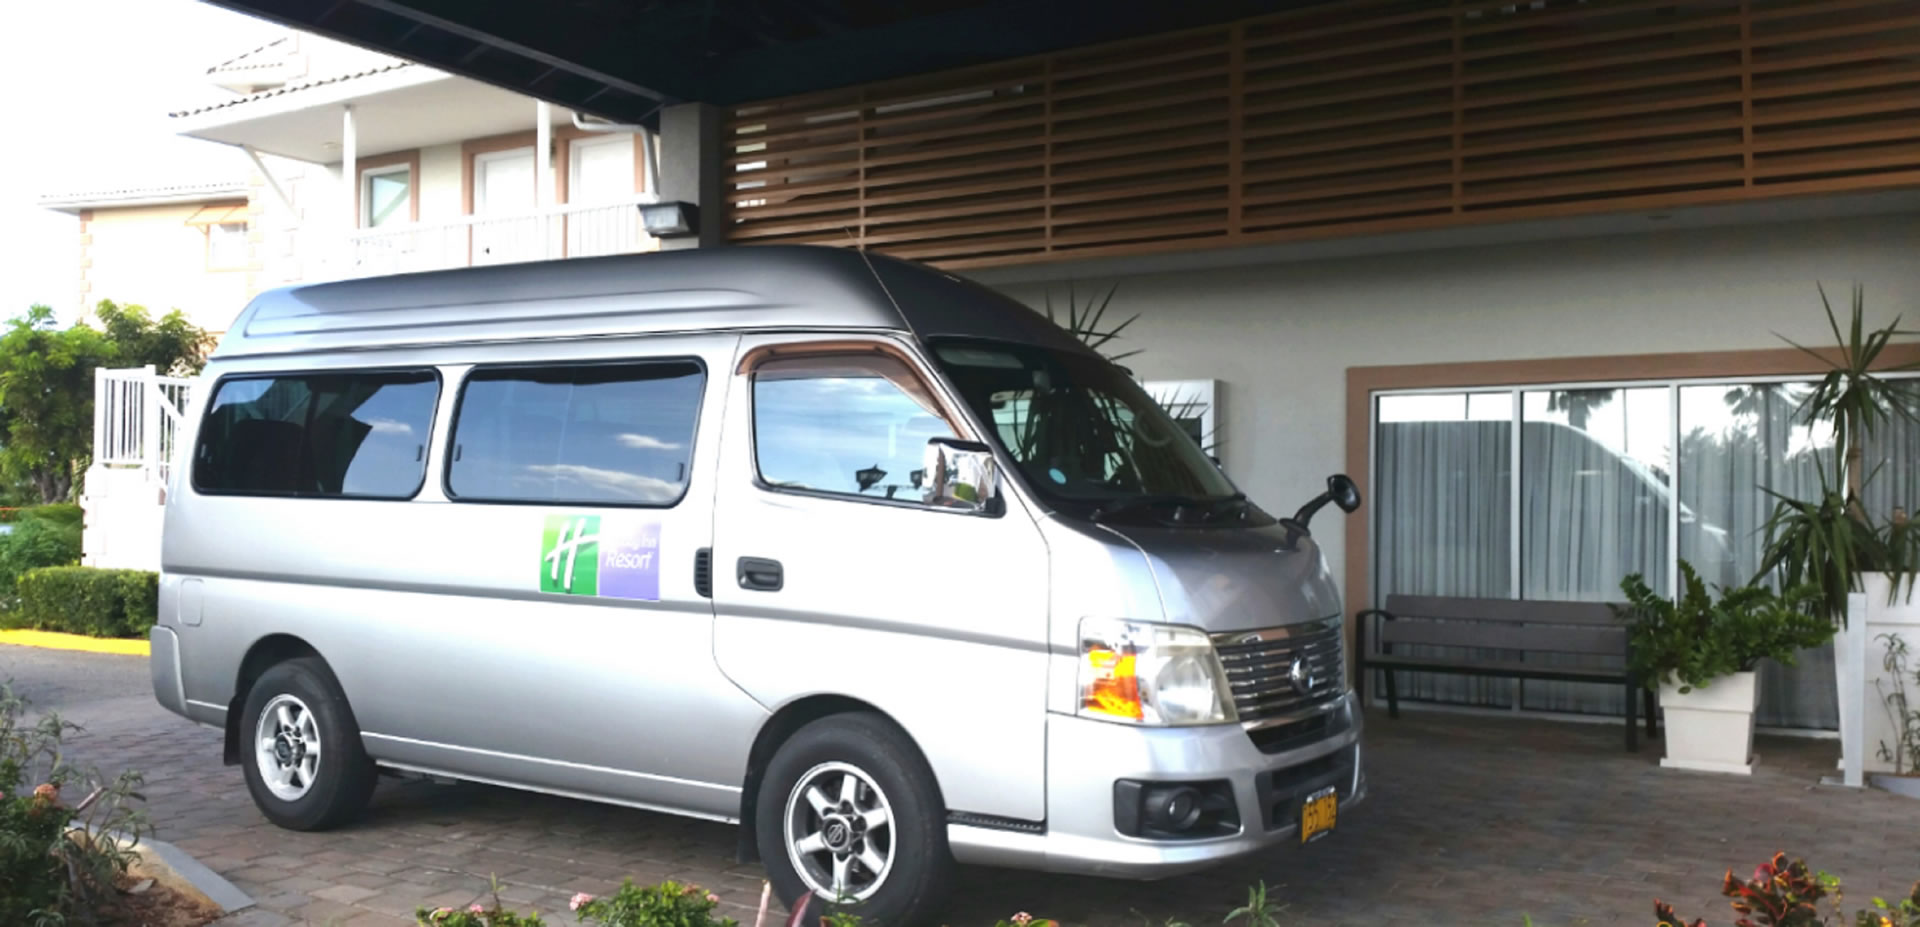 The shuttle van at the entrance of the Grand Caymanian Resort.